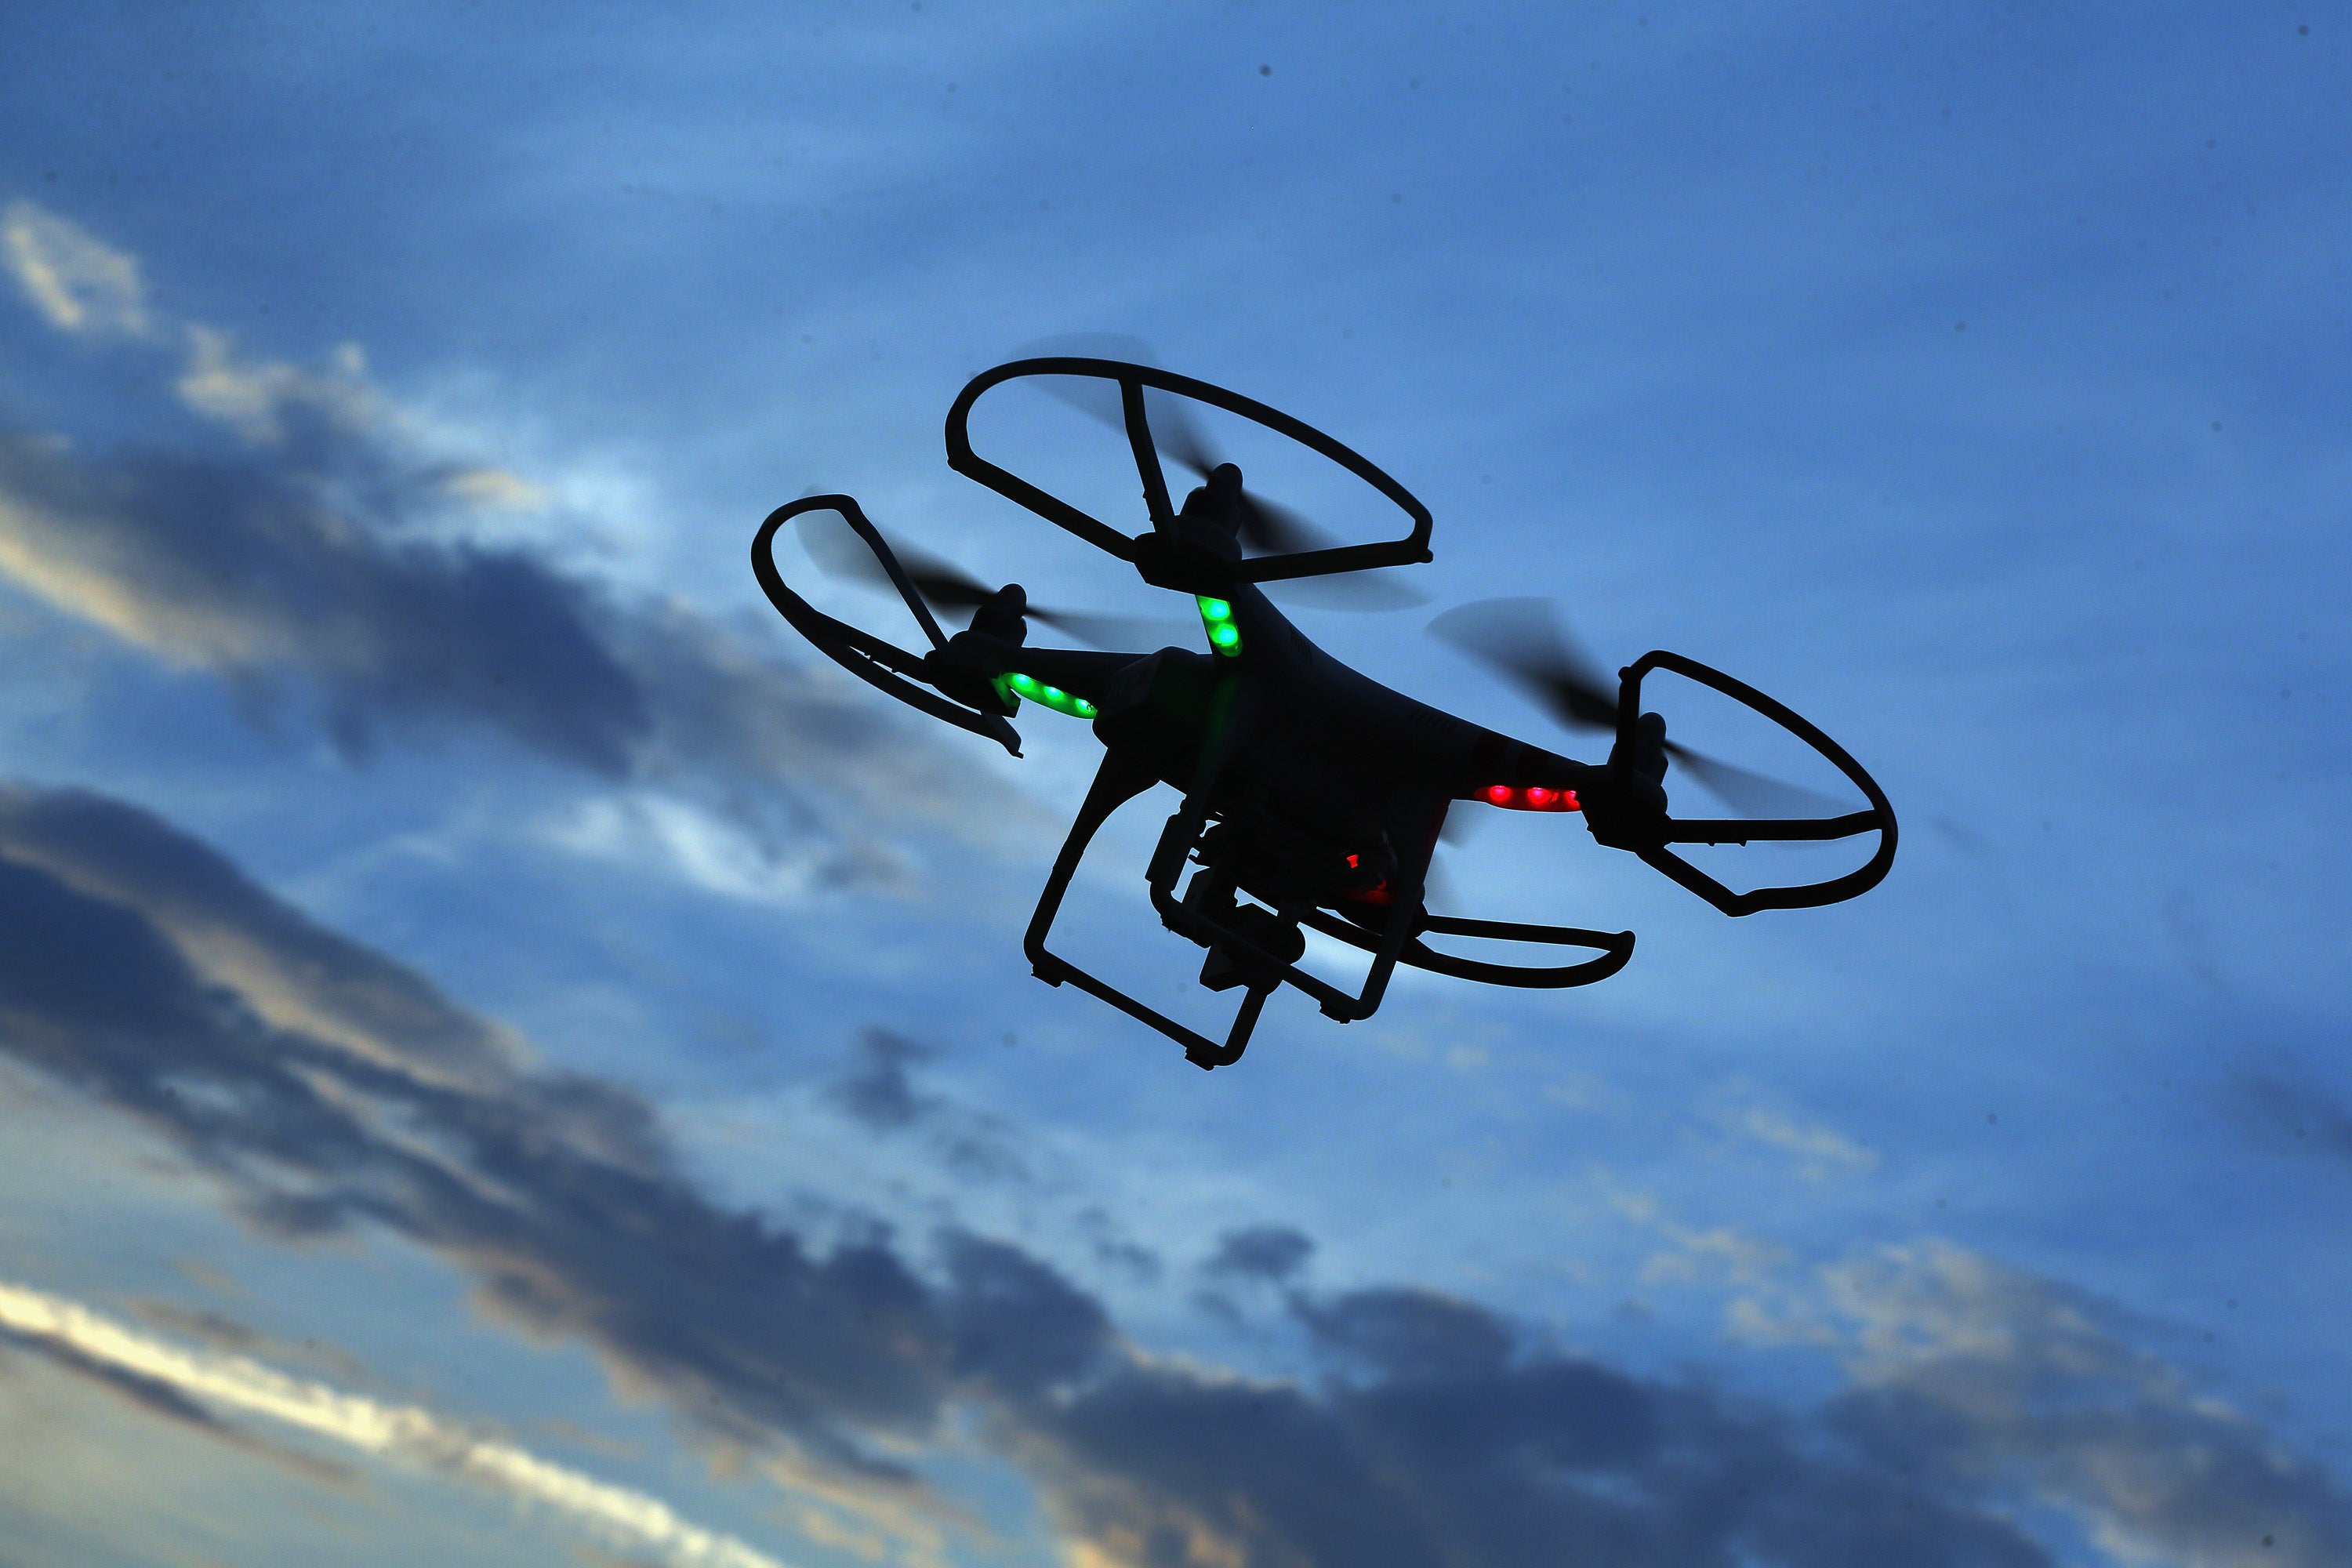 The Indian government has liberalised the regulations for purchasing and operating drones